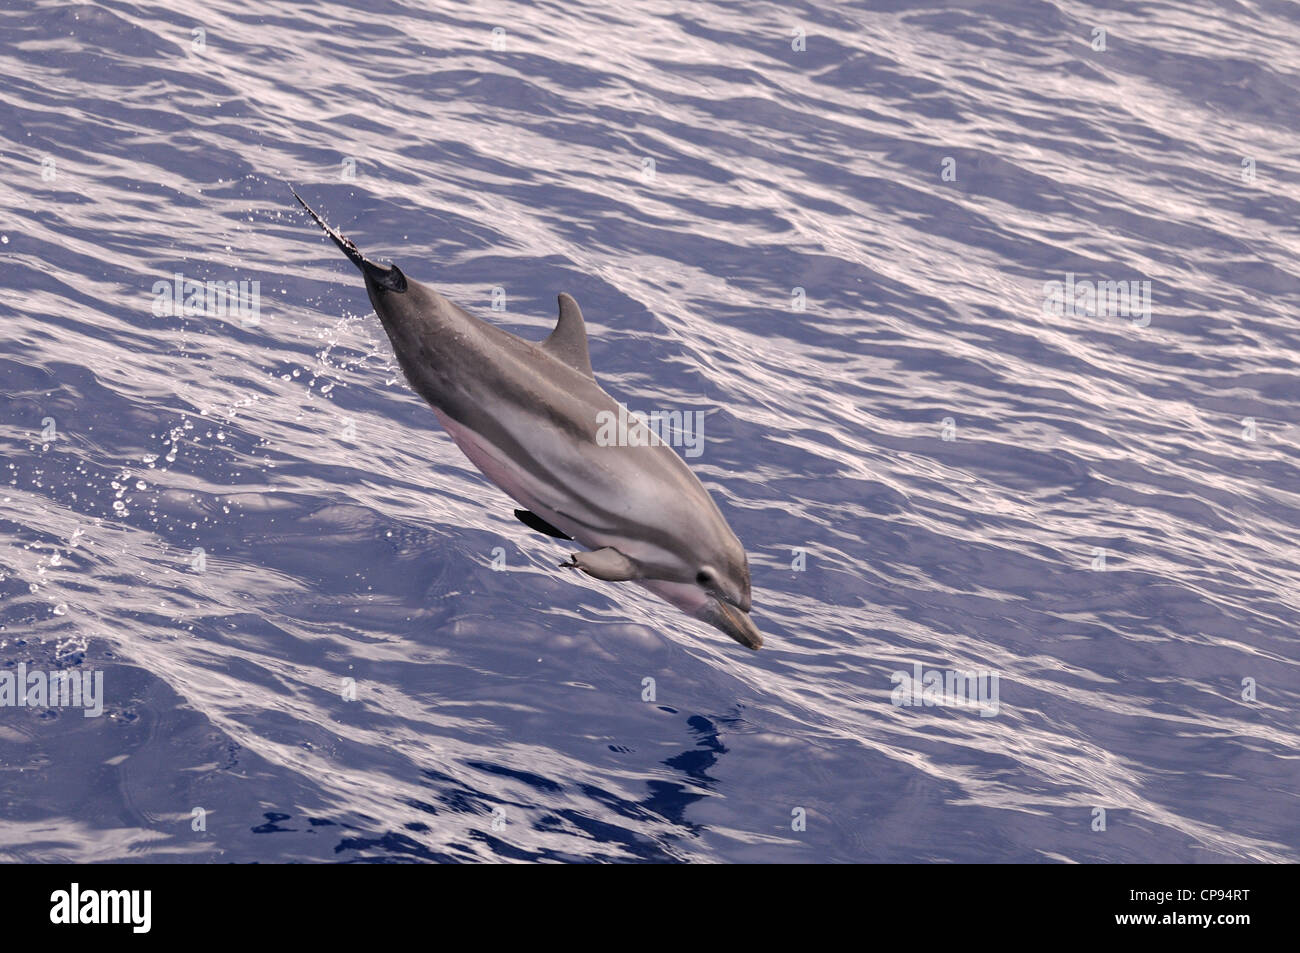 Striped Dolphin (Stenella coeruleoalba) leaping out of the water, The Maldives Stock Photo